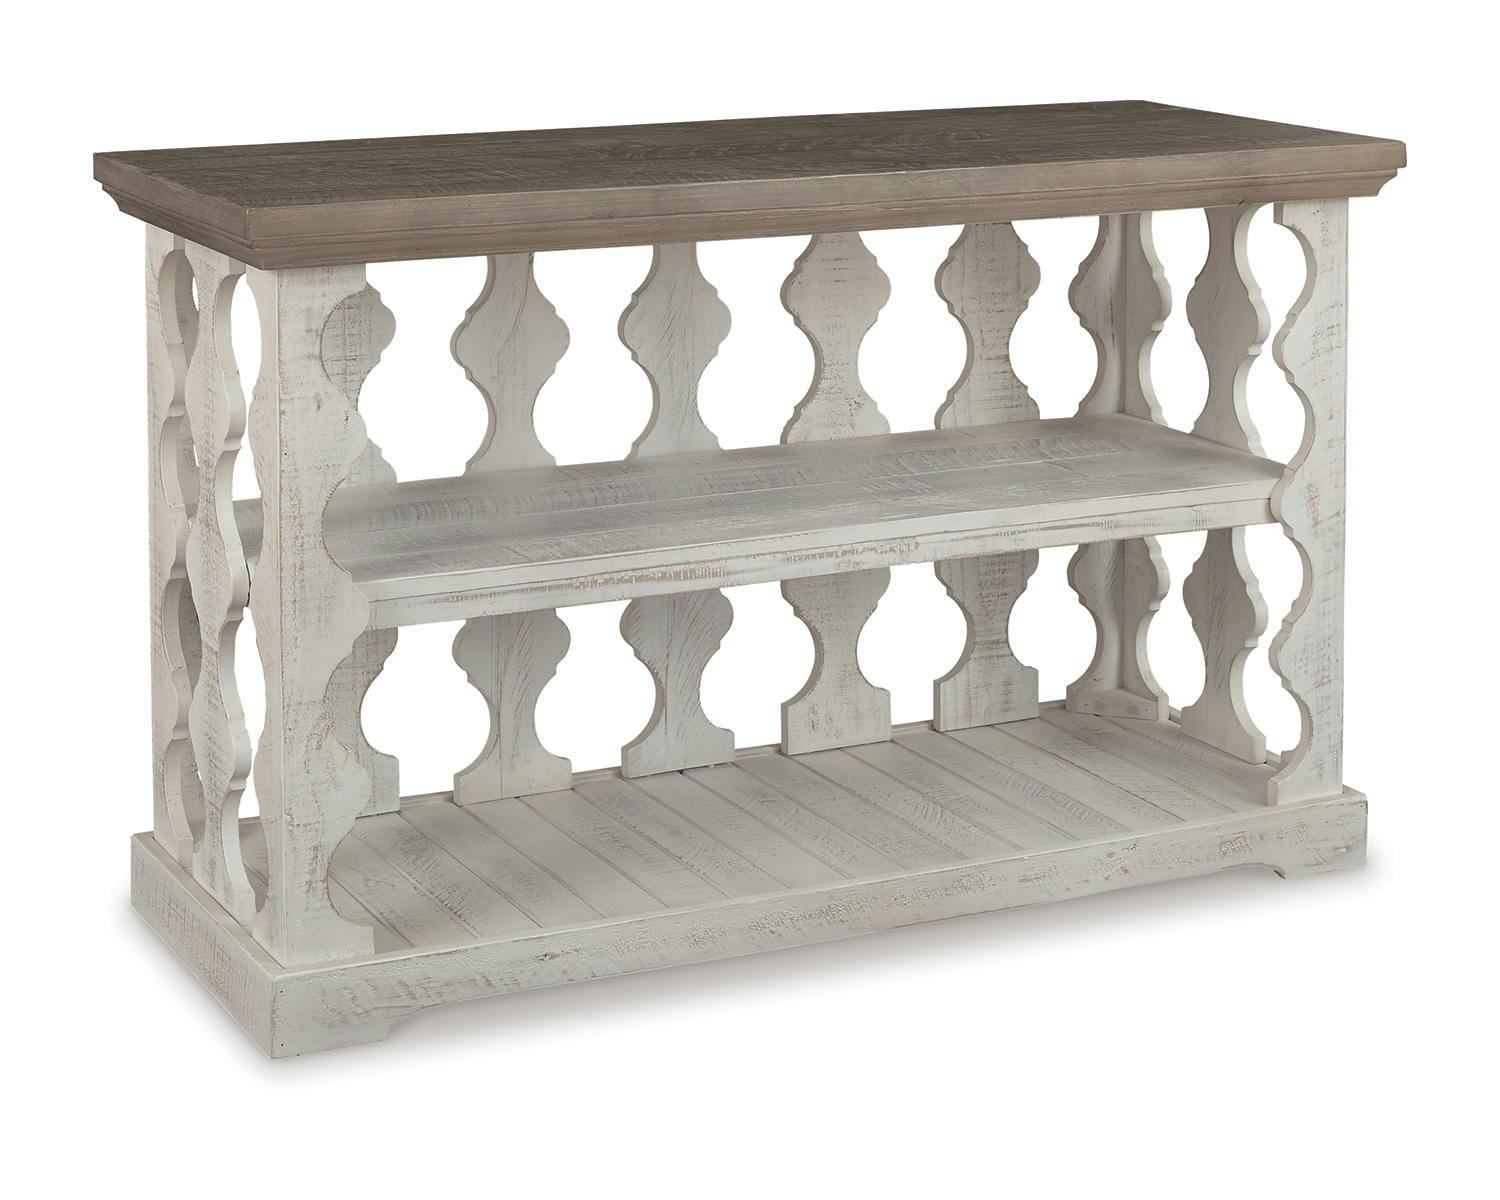 Havalance Dual-Tone Extendable Console Table in Gray and White